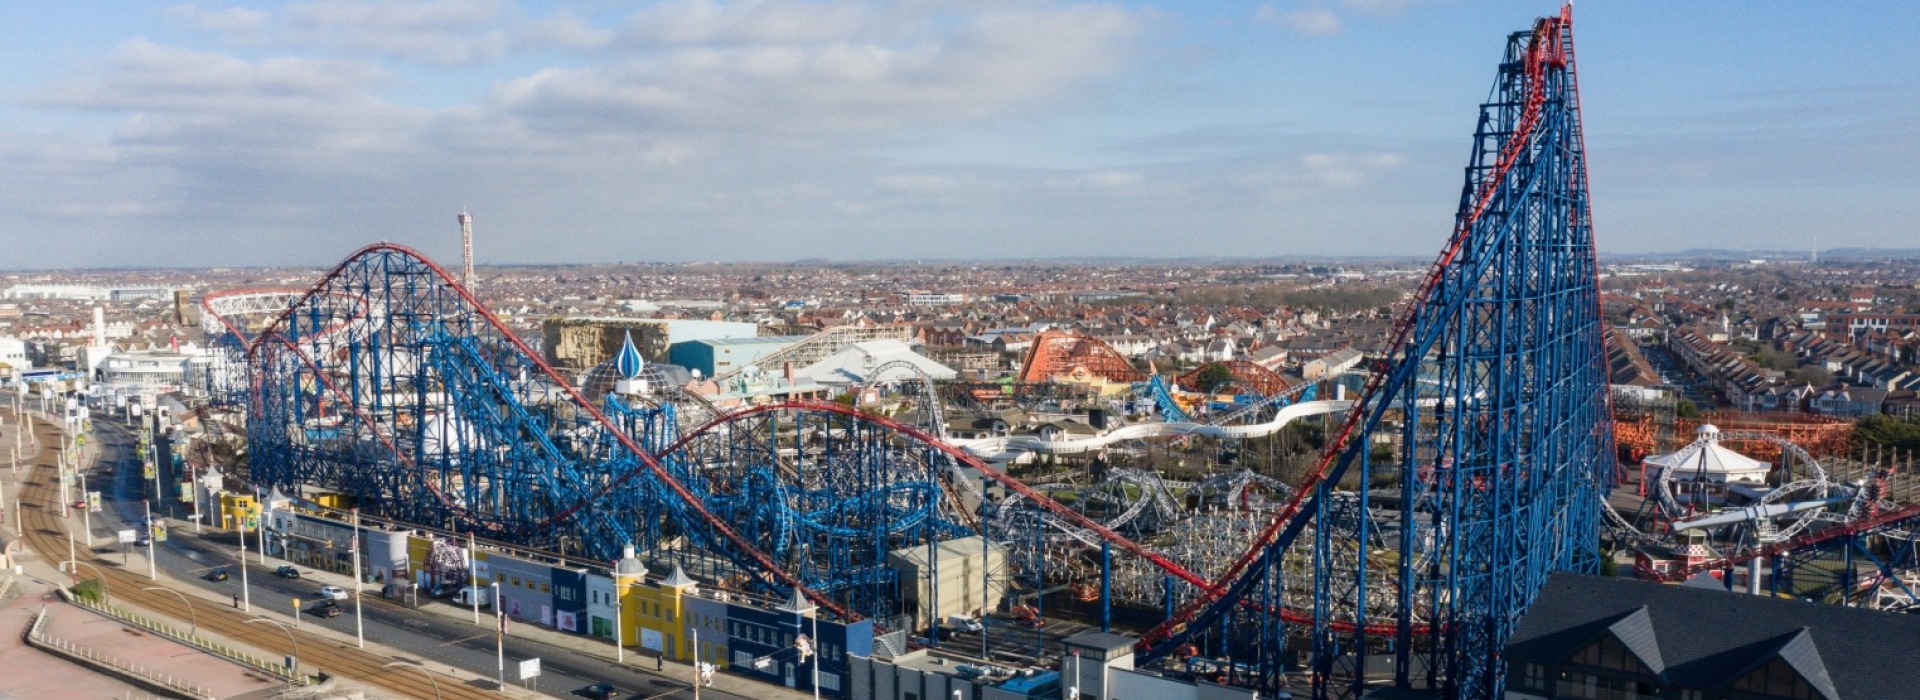 UK’s Tallest Rollercoaster Retracked by Taziker